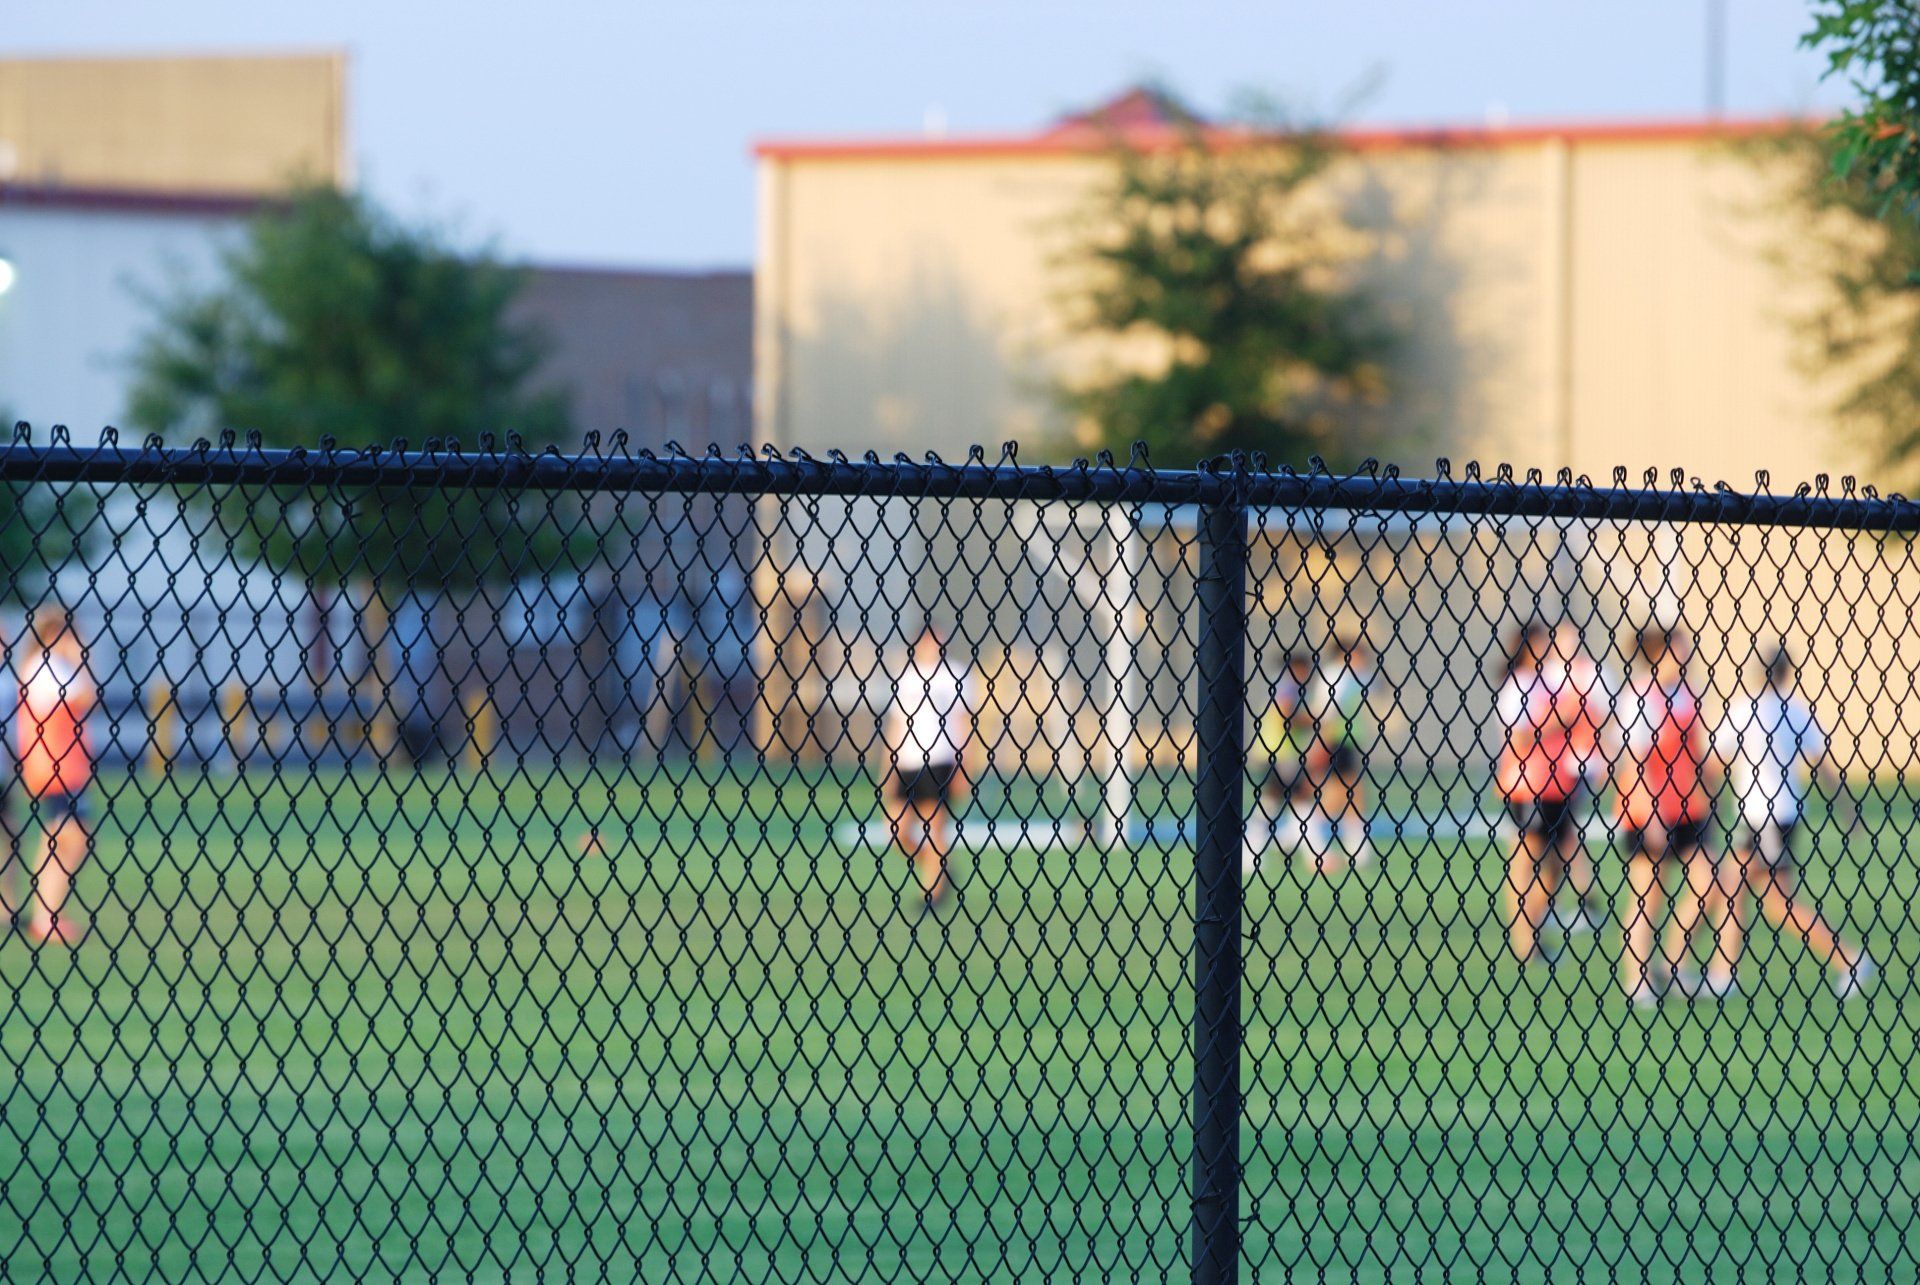 chain link fencing with soccer players in the field behind